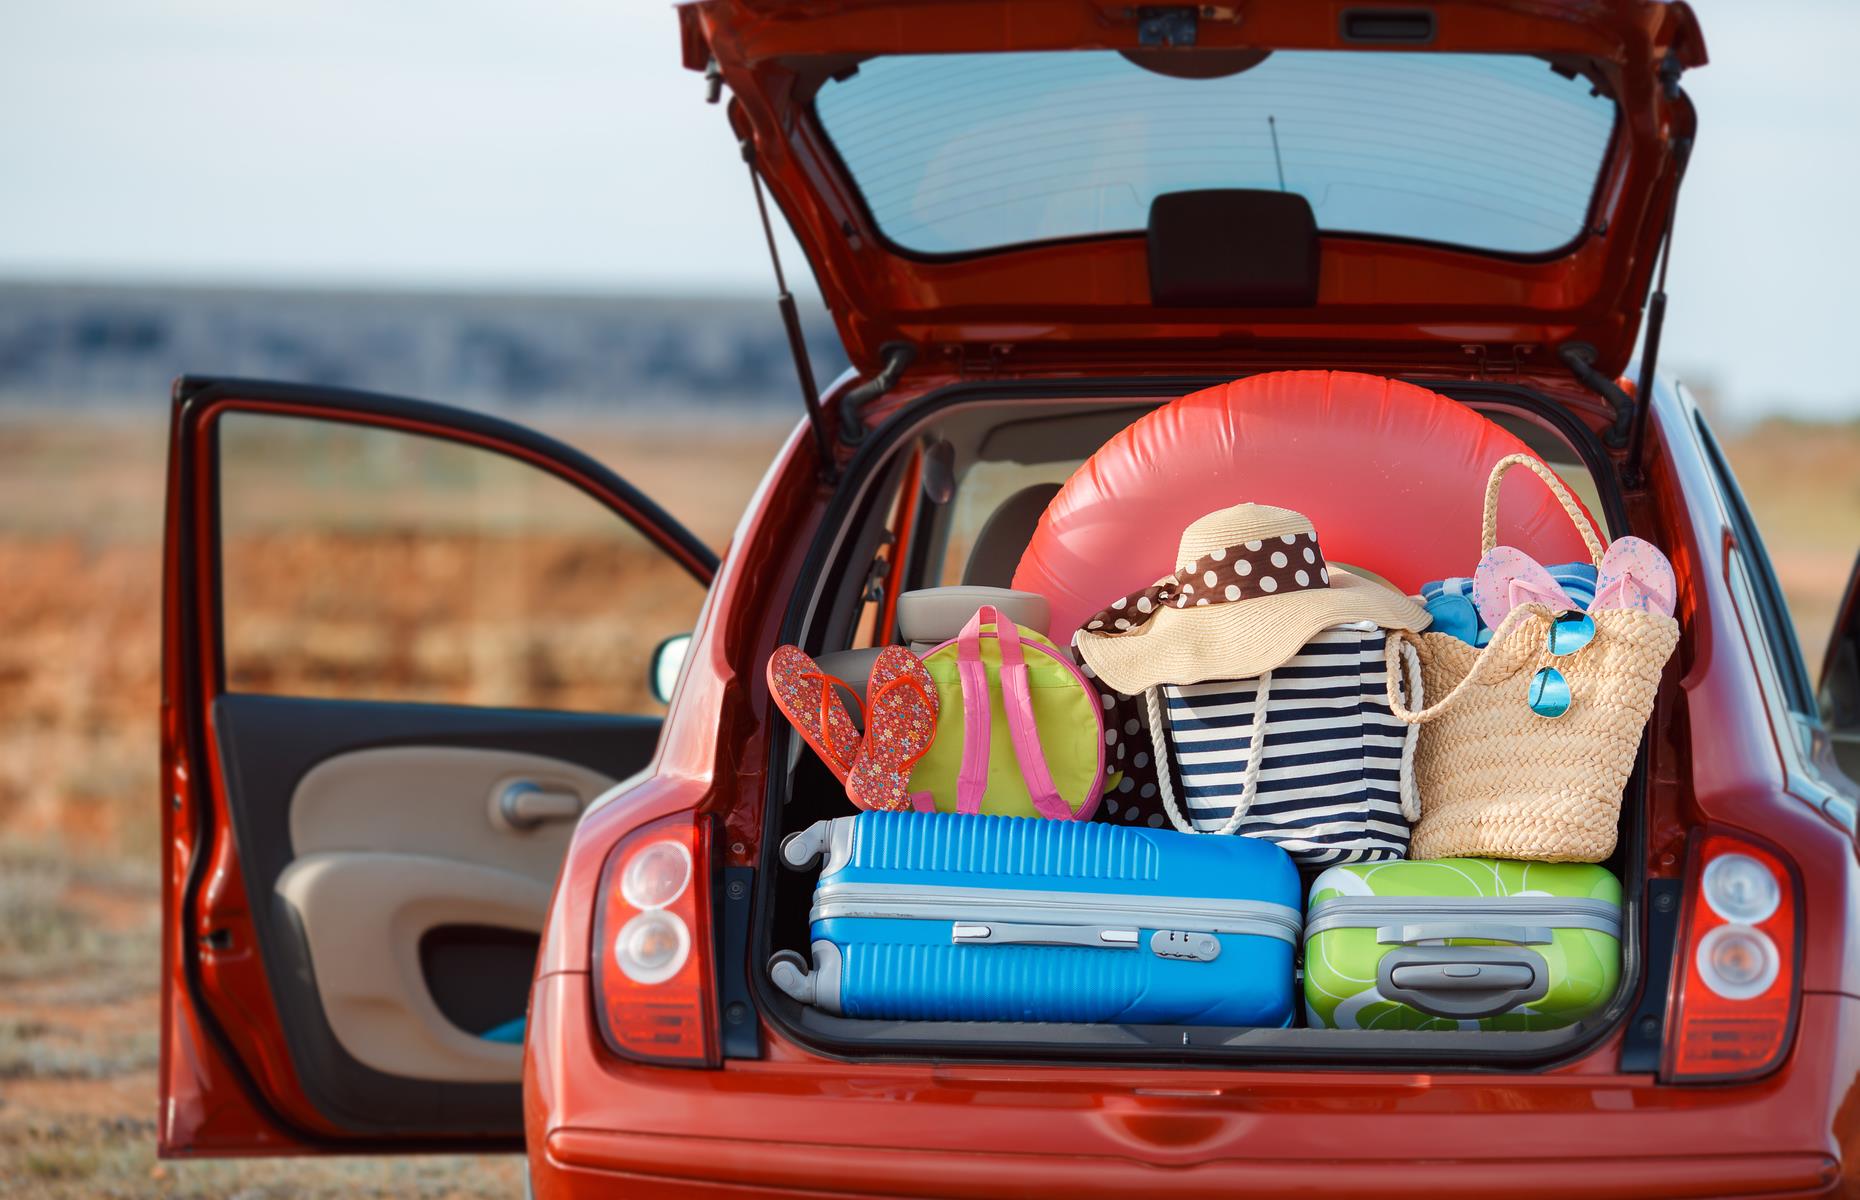 It might be tempting to treat your car or campervan like a giant suitcase on wheels, but don't cram it too full. You'll need room for the supplies you pick up along the way and you don't want to feel cramped. Pack as mindfully as you would for any other vacation and keep important items close to hand, so you can avoid constant repacking. Always go for soft bags over structured cases too. They're far easier to squeeze in.